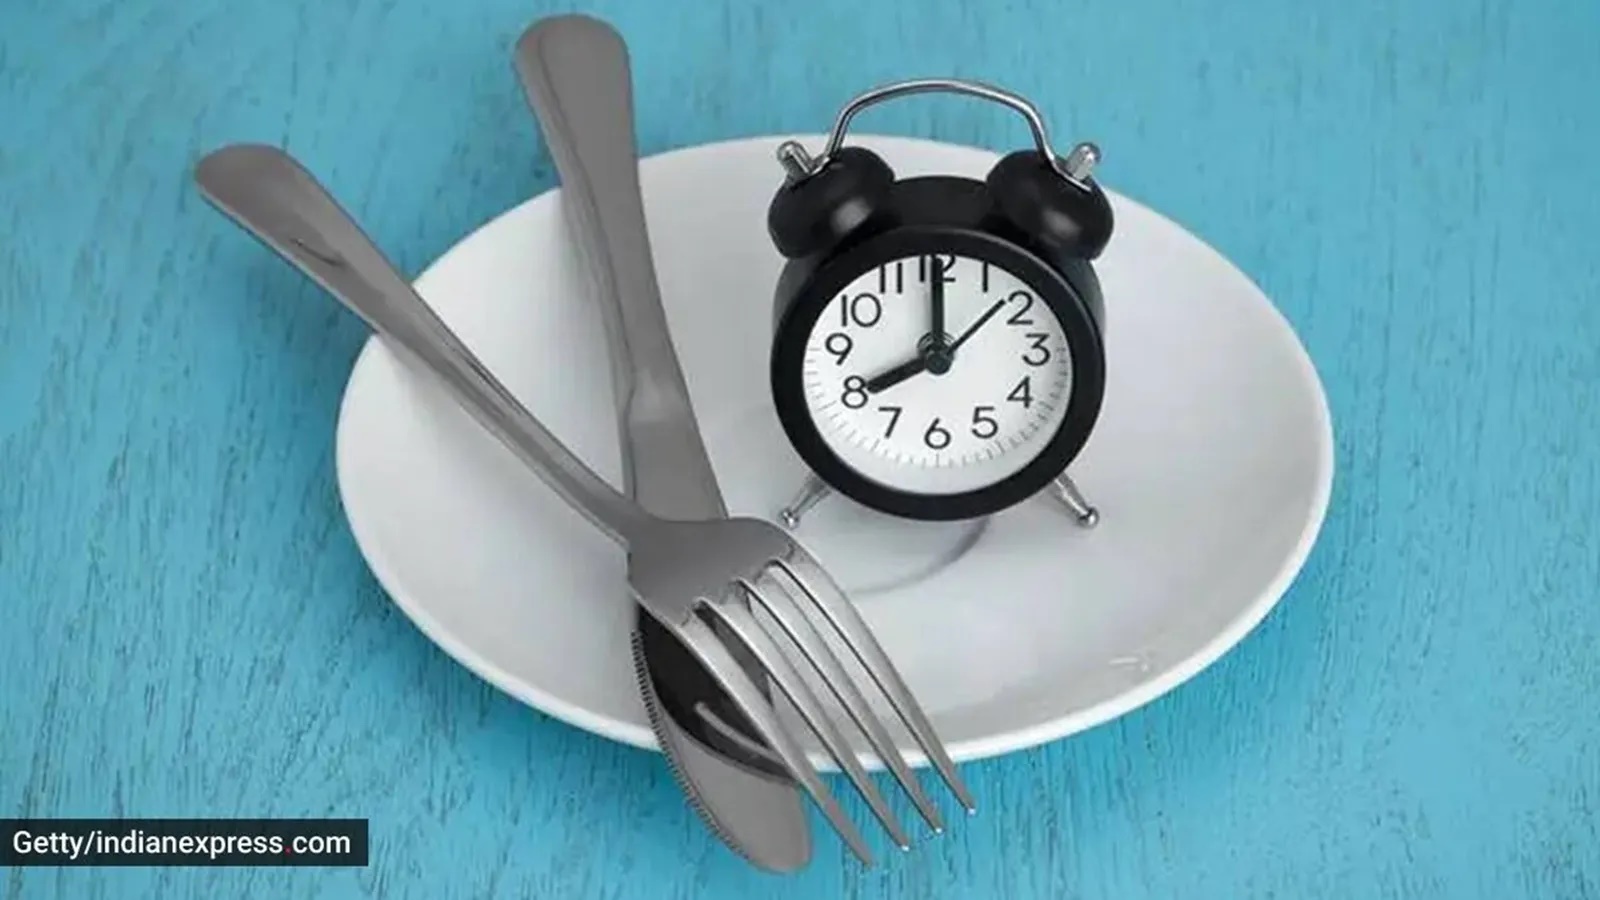 android, does 24-hour fasting between meals help stop inflammation, illness?